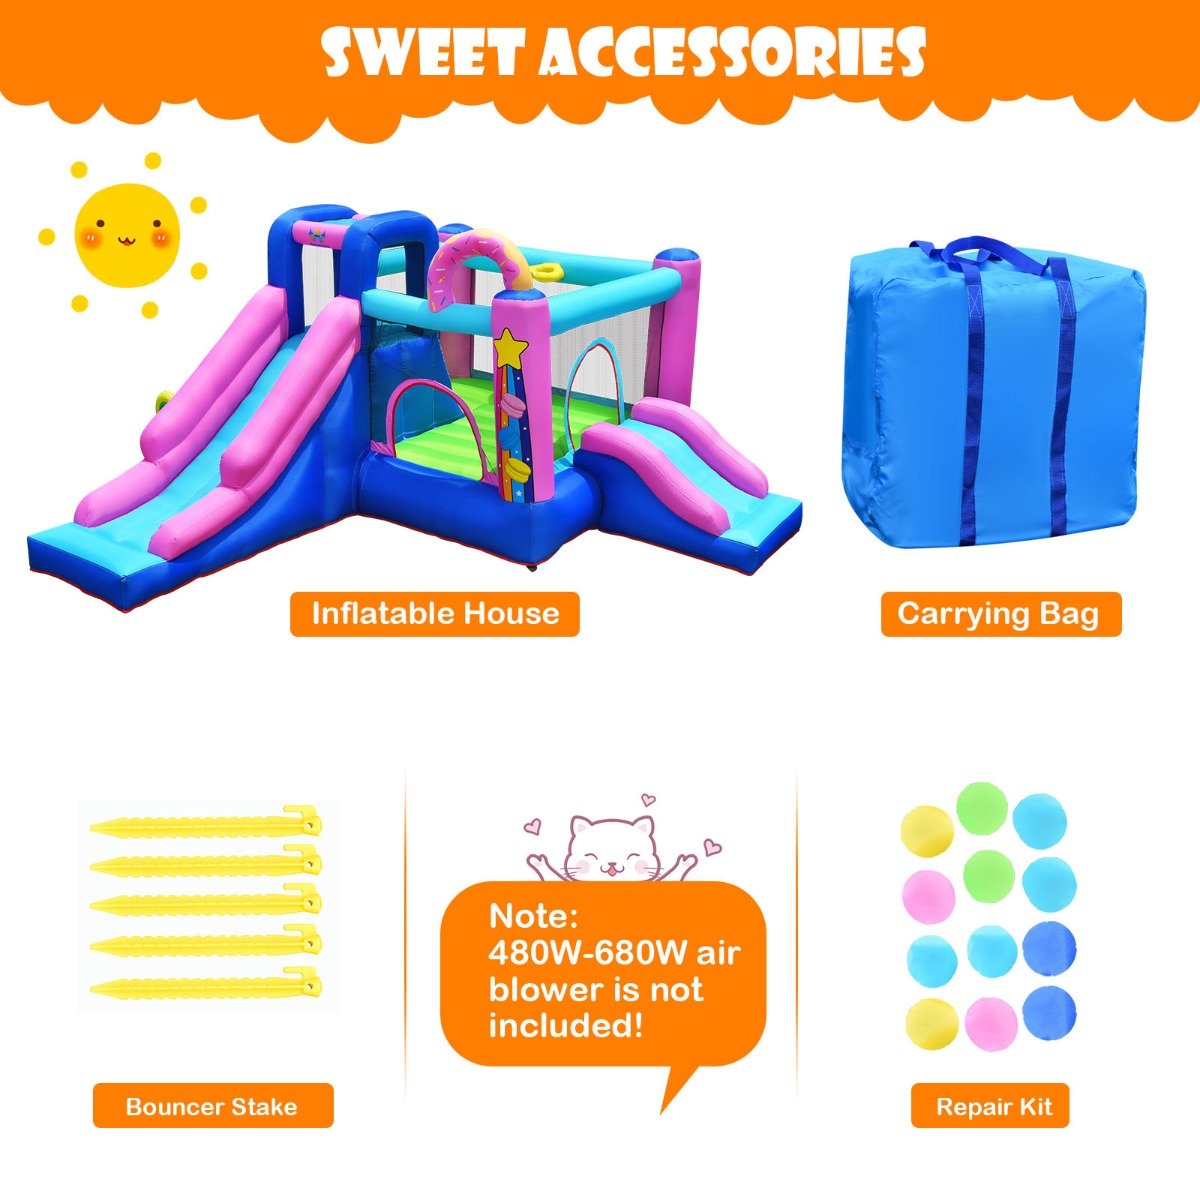 Wholesome Entertainment: Inflatable Bouncer with 2 Slides (Blower Included)